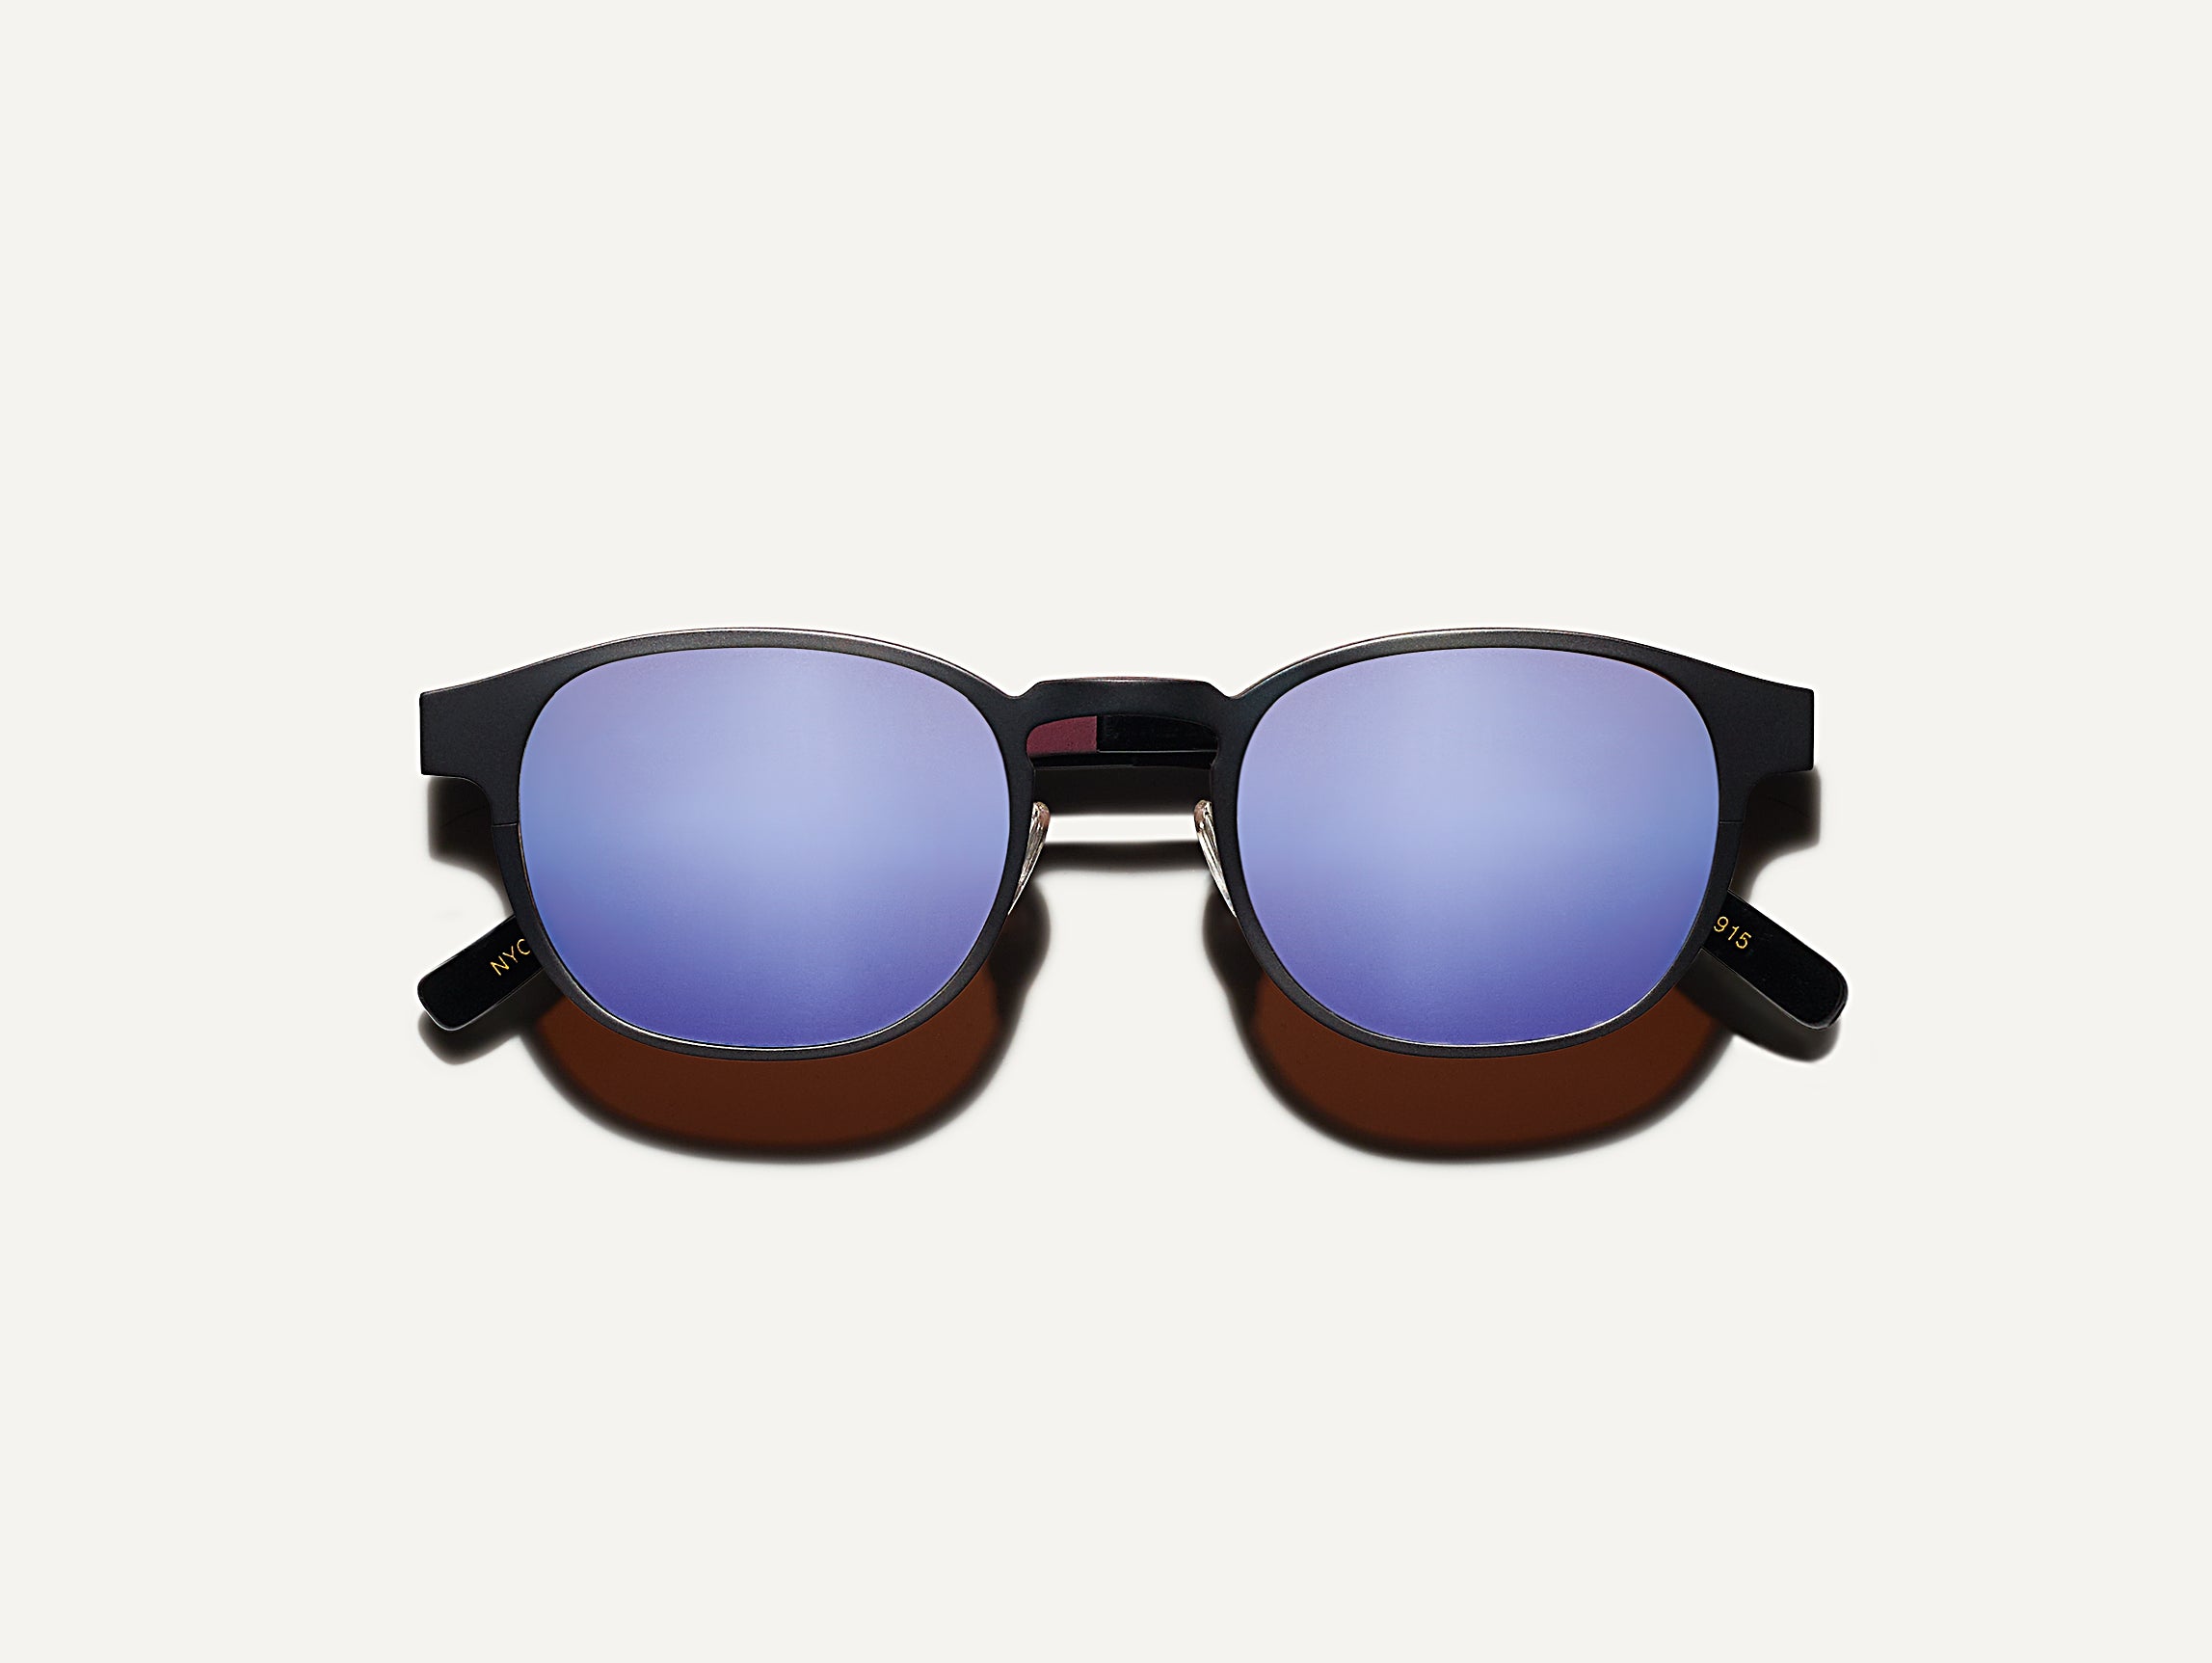 The LEMTOSH-T SUN in Charcoal/Wine with Silver Lenses